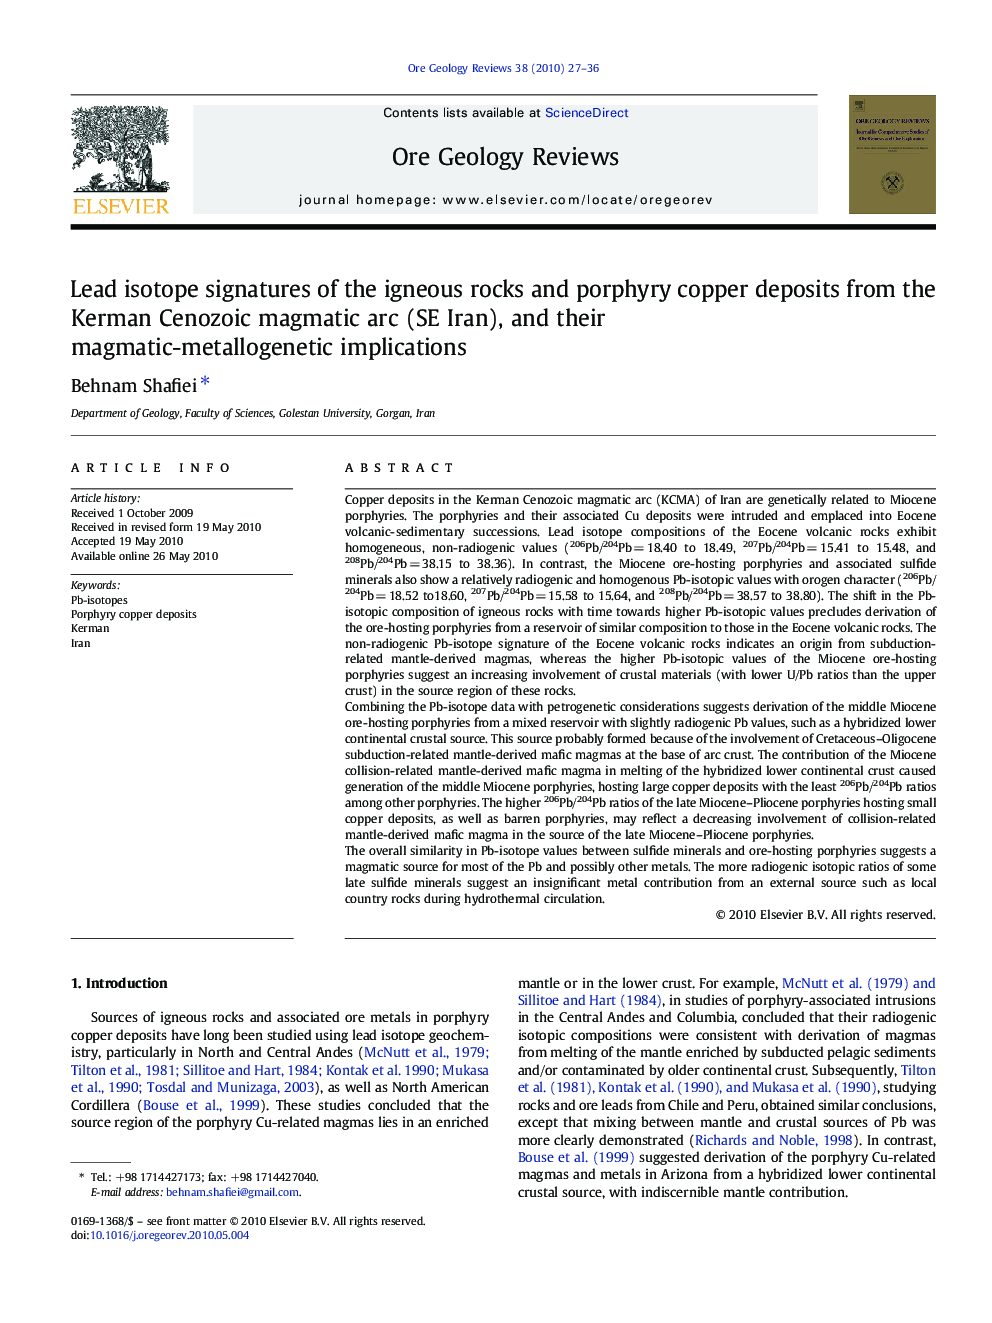 Lead isotope signatures of the igneous rocks and porphyry copper deposits from the Kerman Cenozoic magmatic arc (SE Iran), and their magmatic-metallogenetic implications